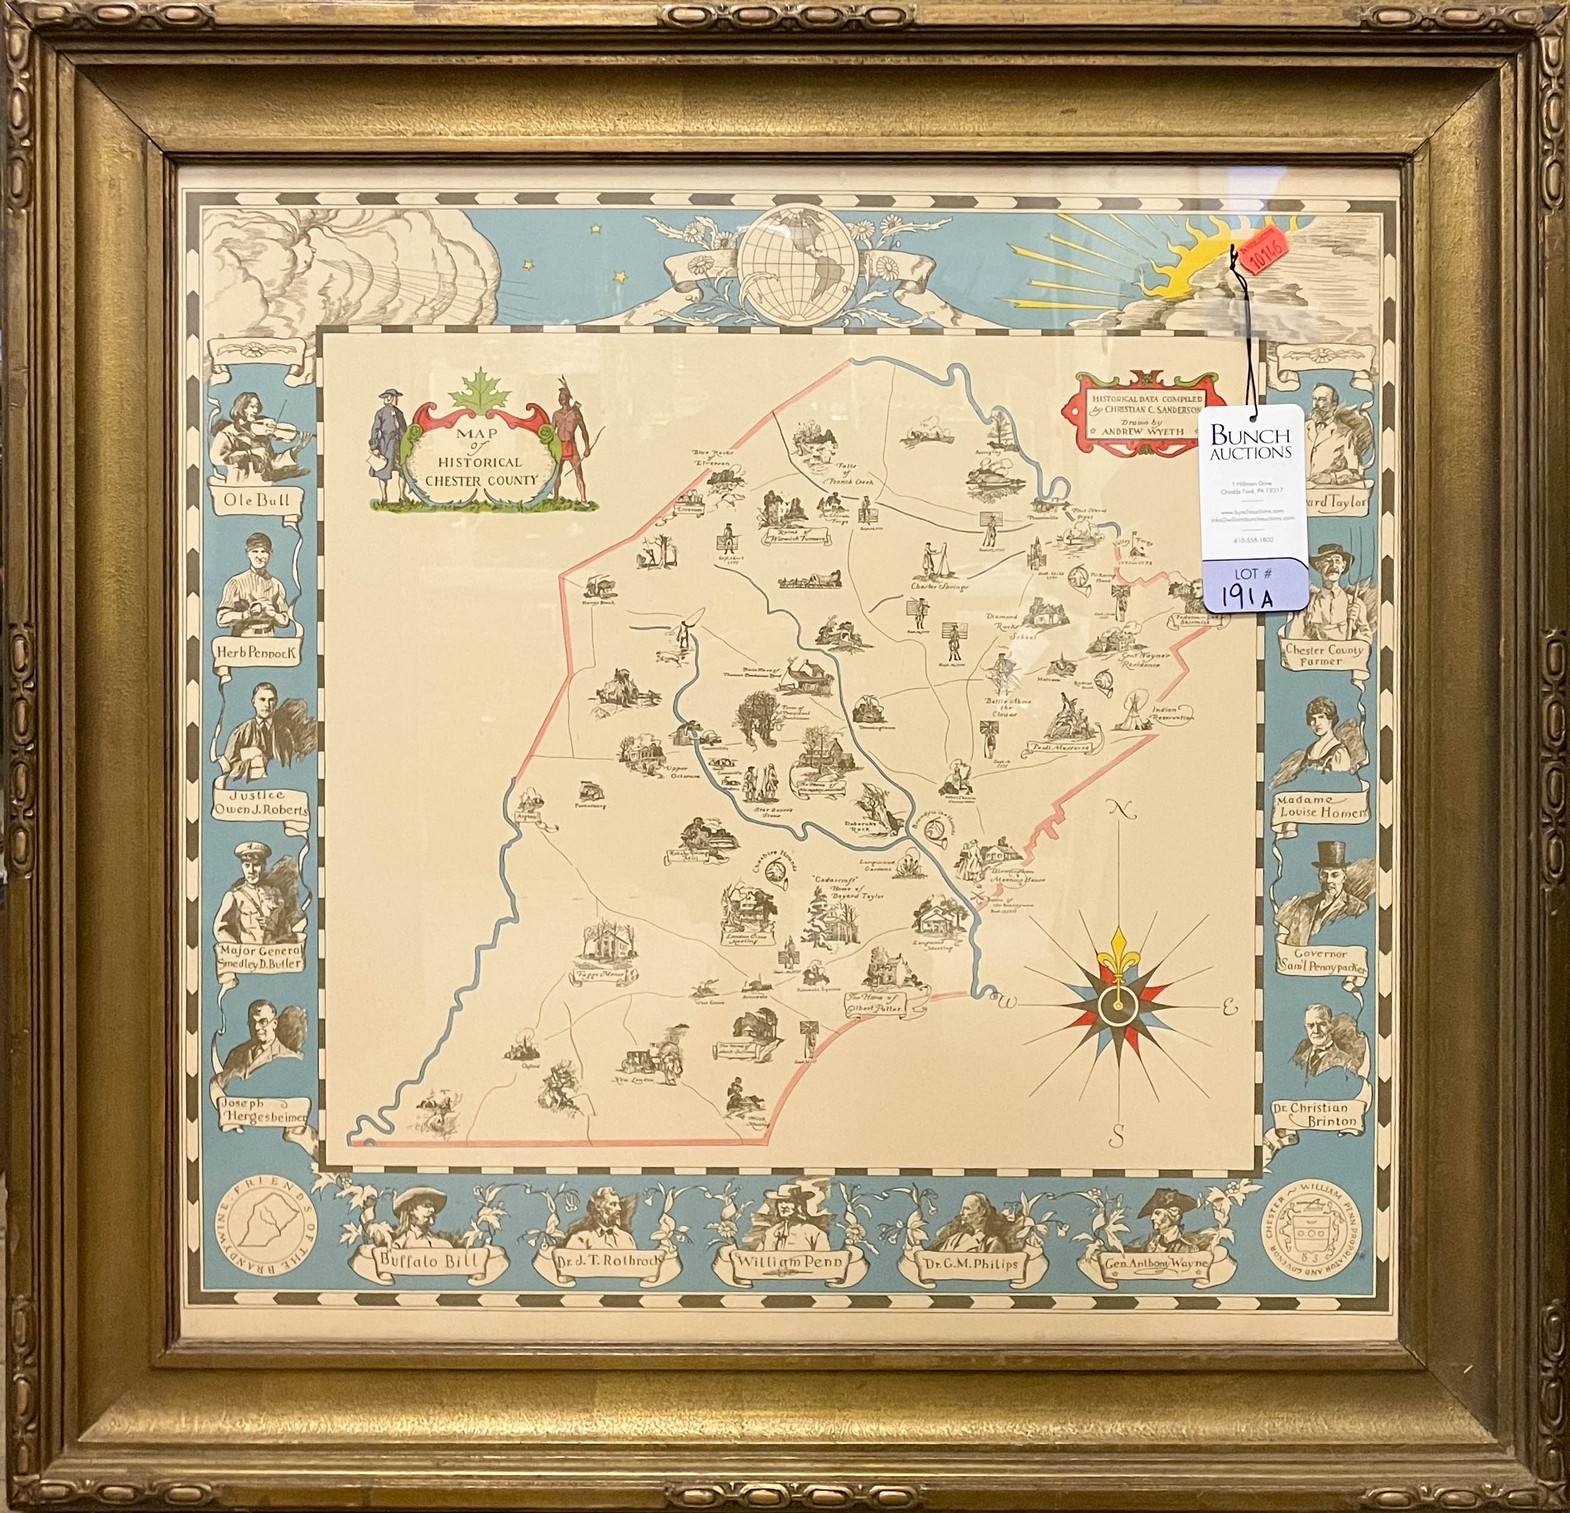 A framed map of historical Chester 2781f3